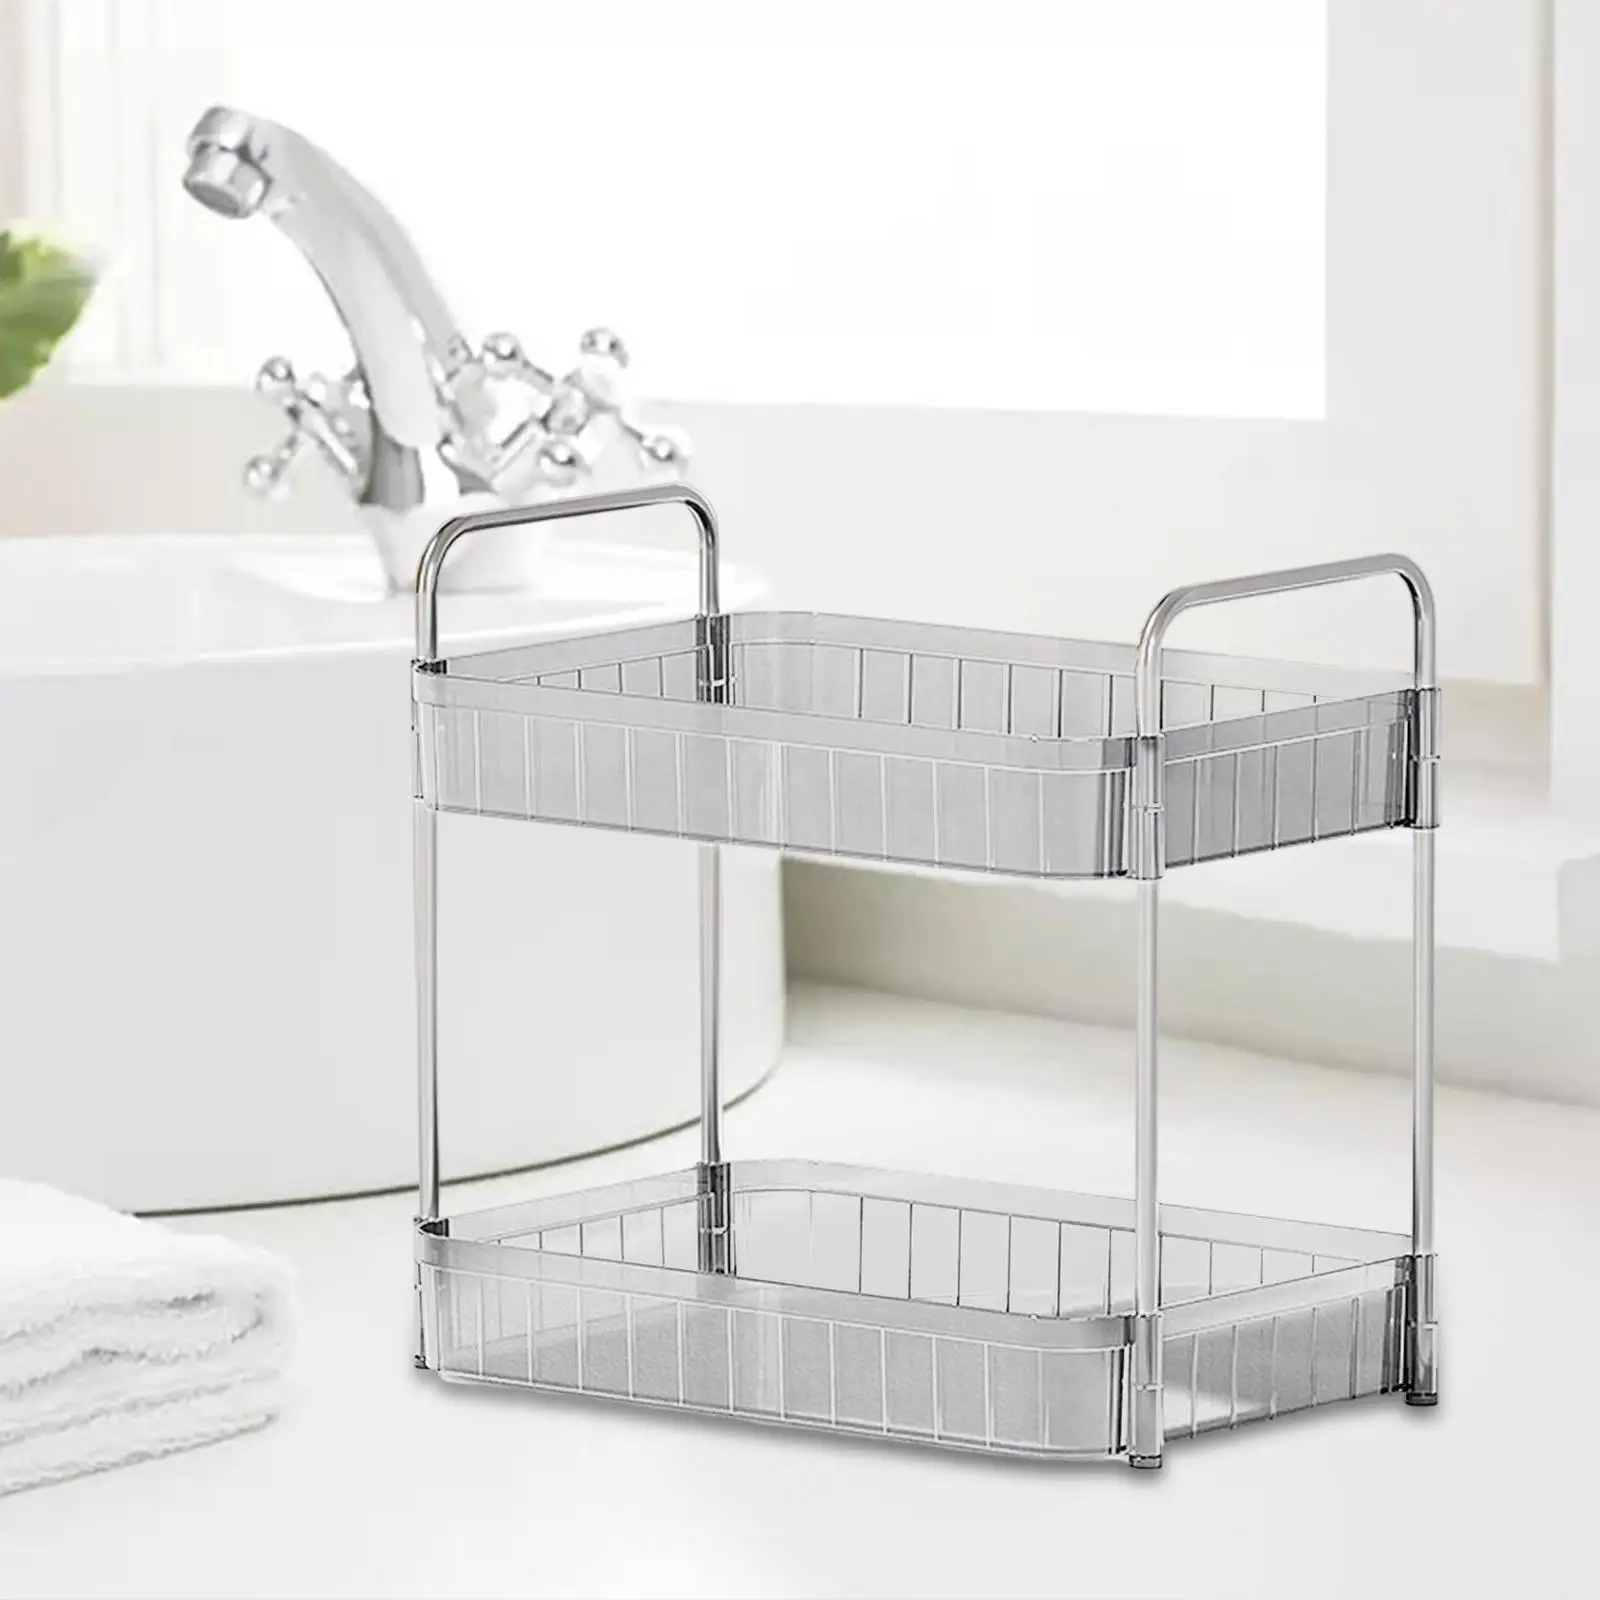 Drain Rack 2 Tier Makeup Caddy Stainless Steel Pipe for Table Bedroom Office